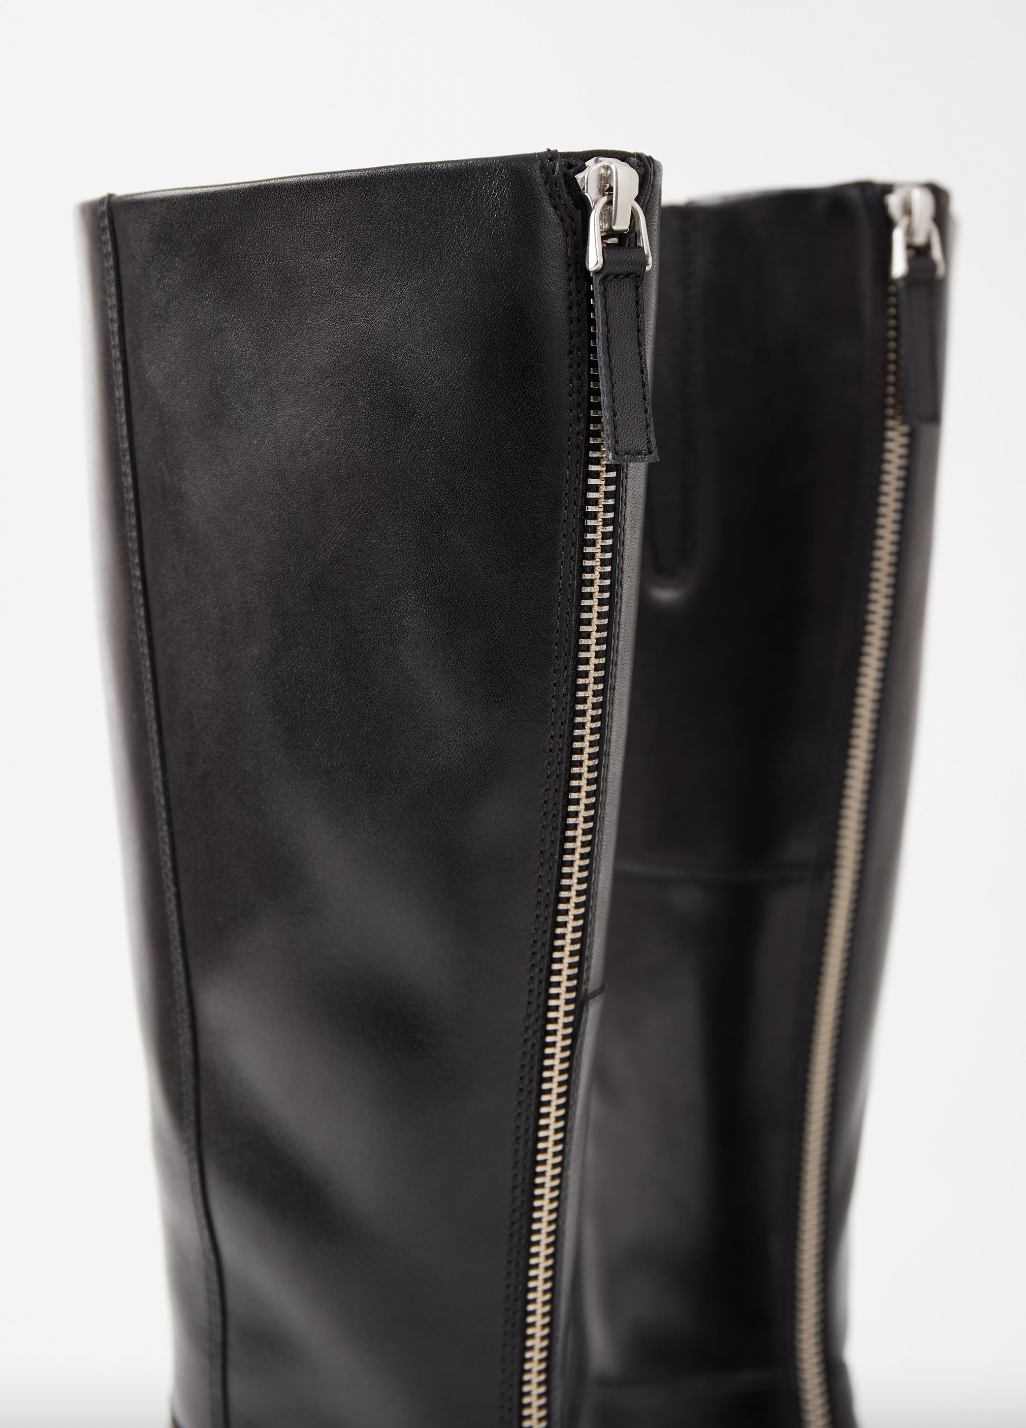 Product Image for Kenova Tall Boots, Black